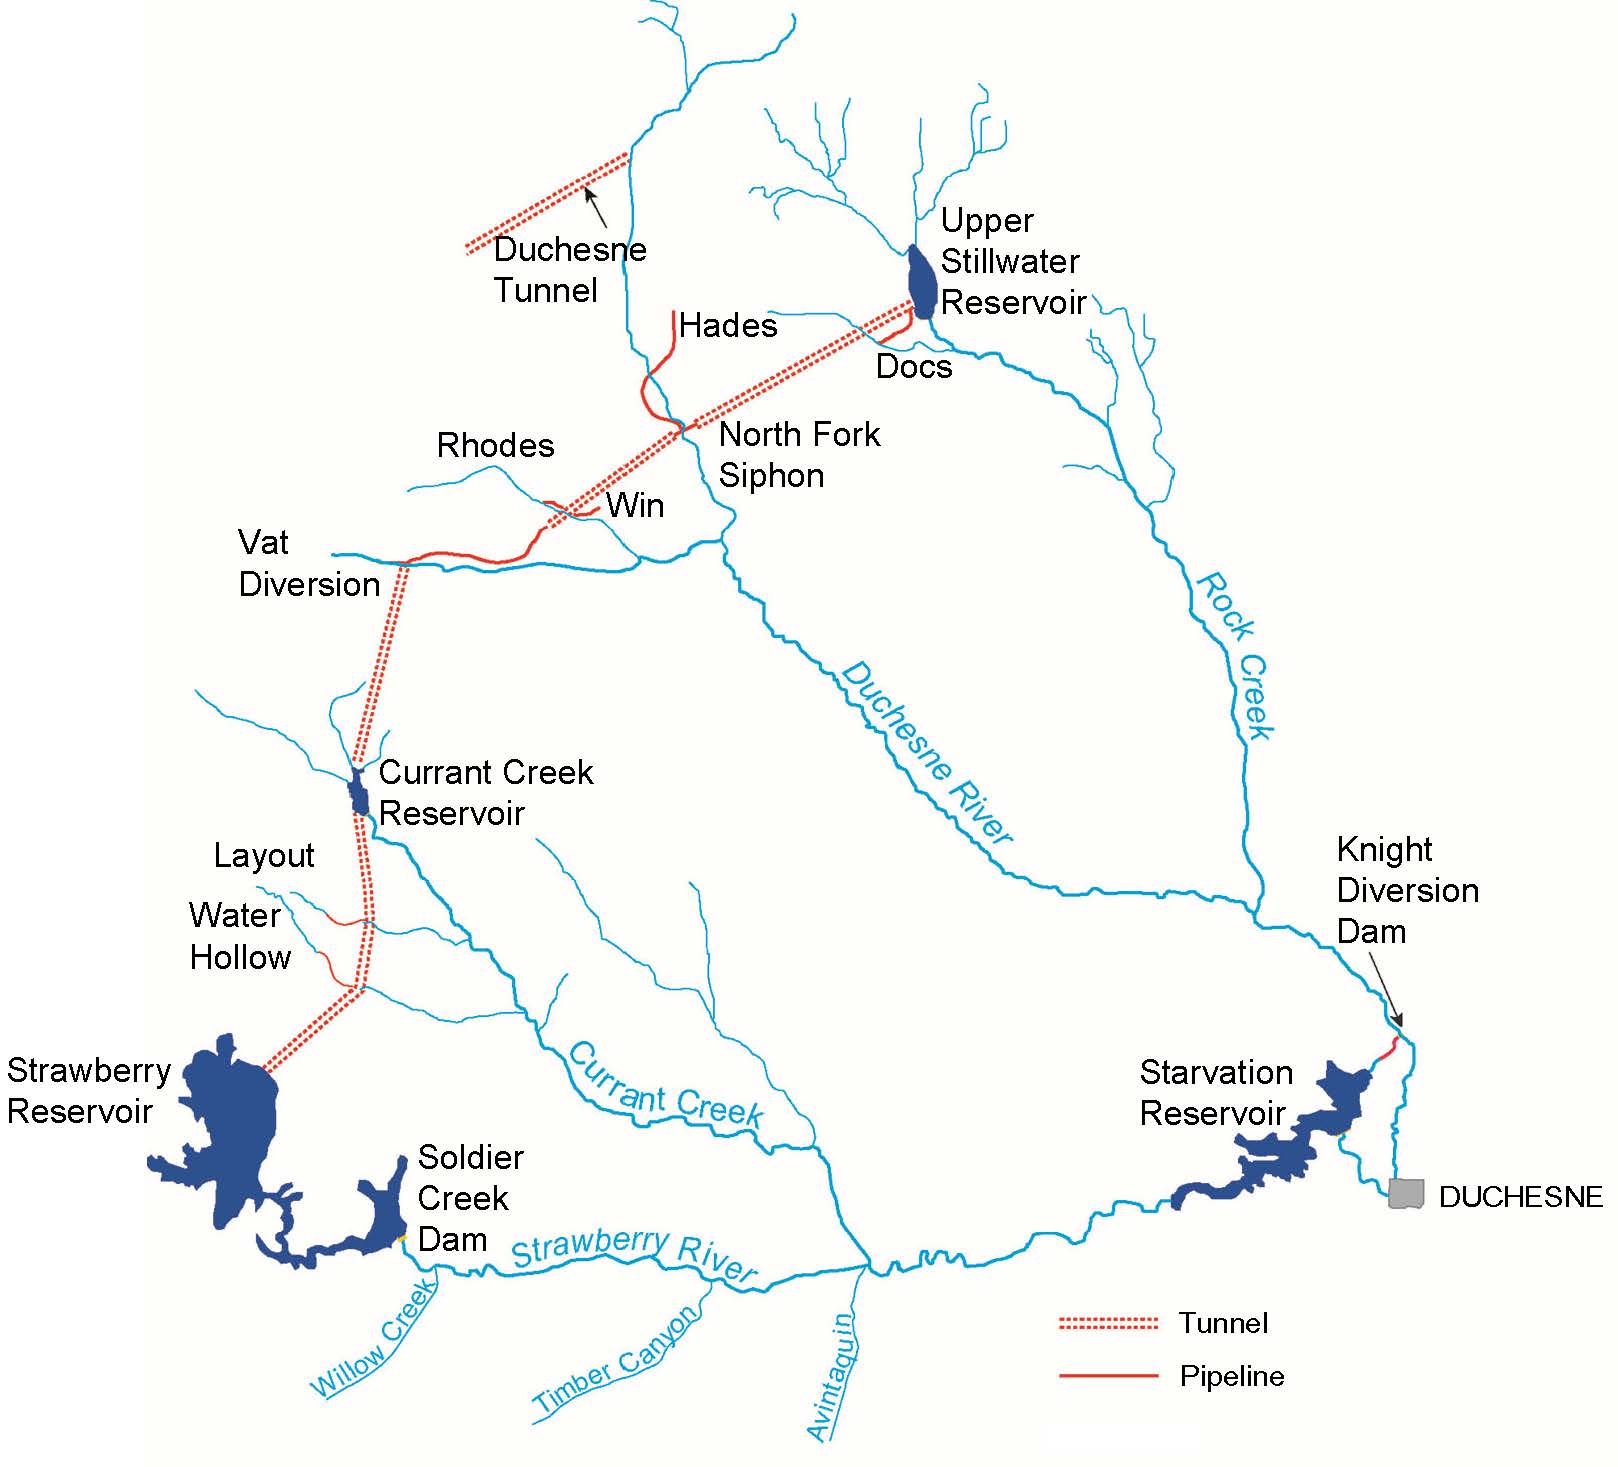 Map of the Strawberry Aqueduct and Collection System of the Bonneville Unit